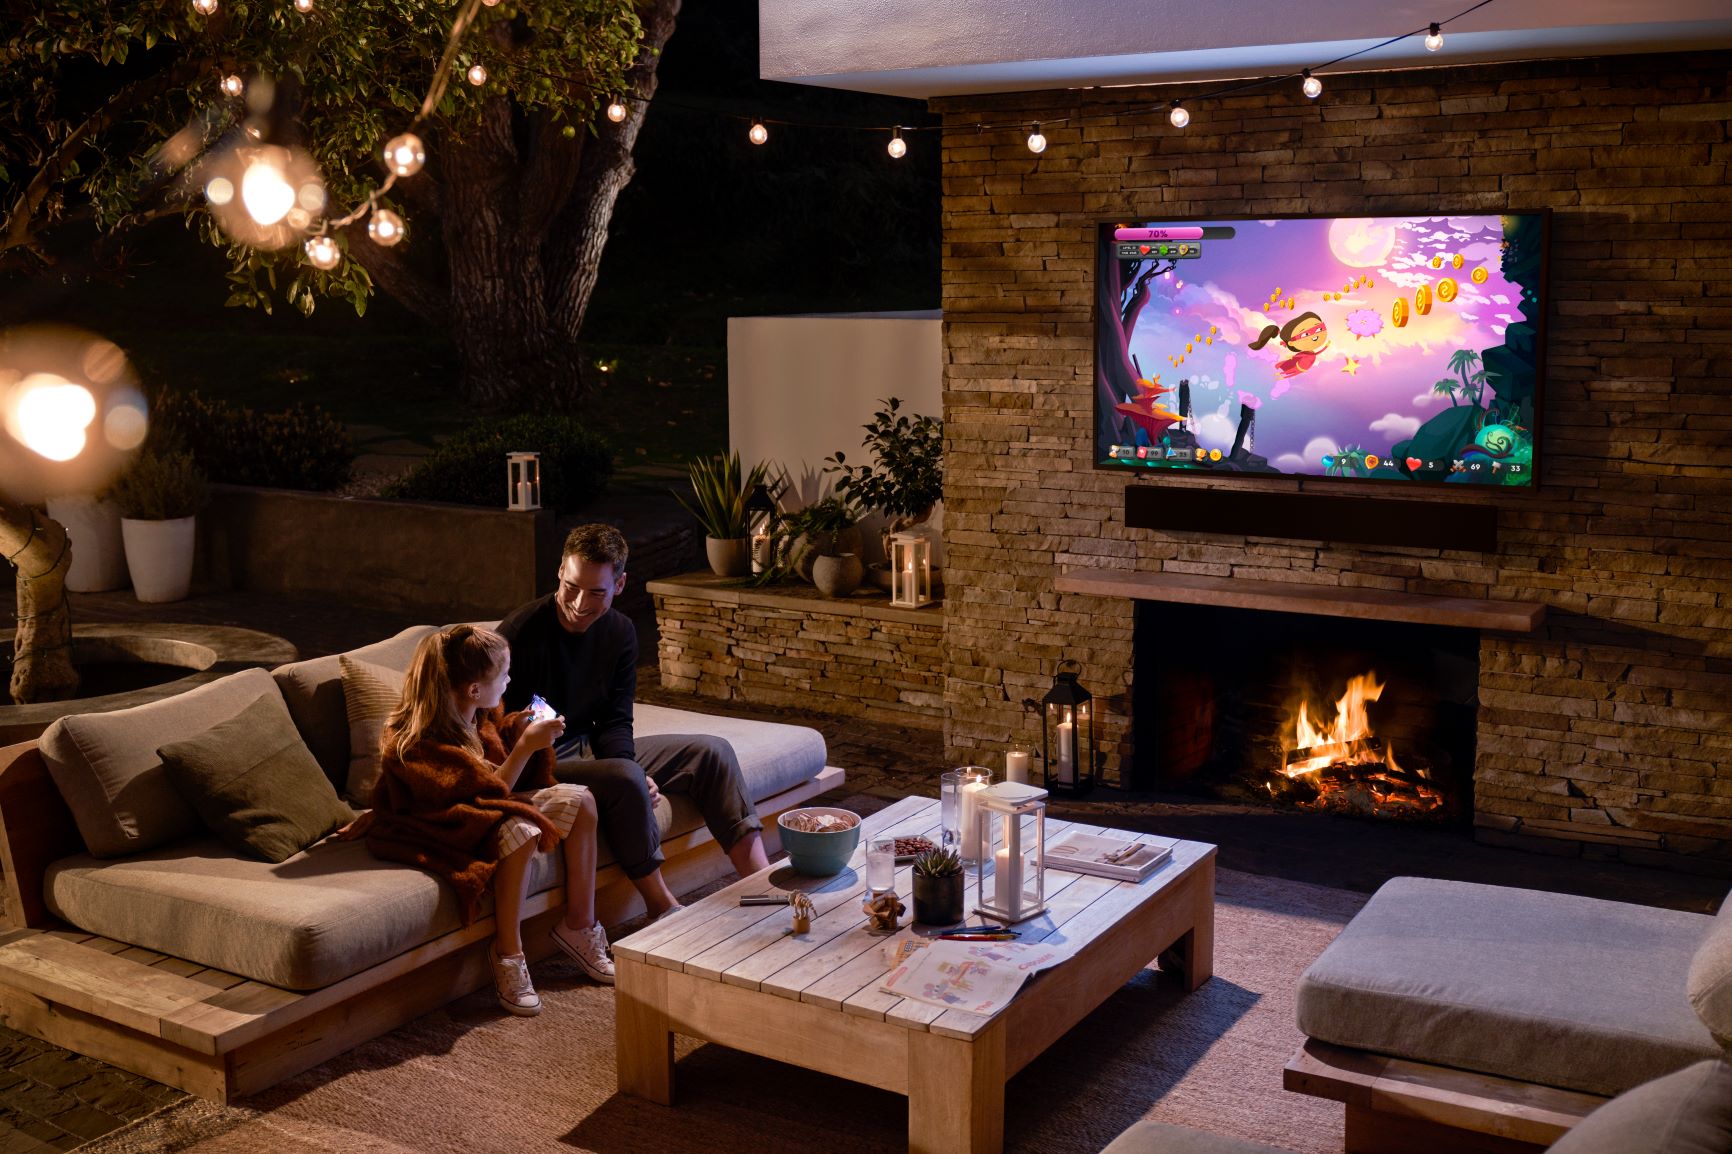 The Terrace - Samsung Outdoors TV